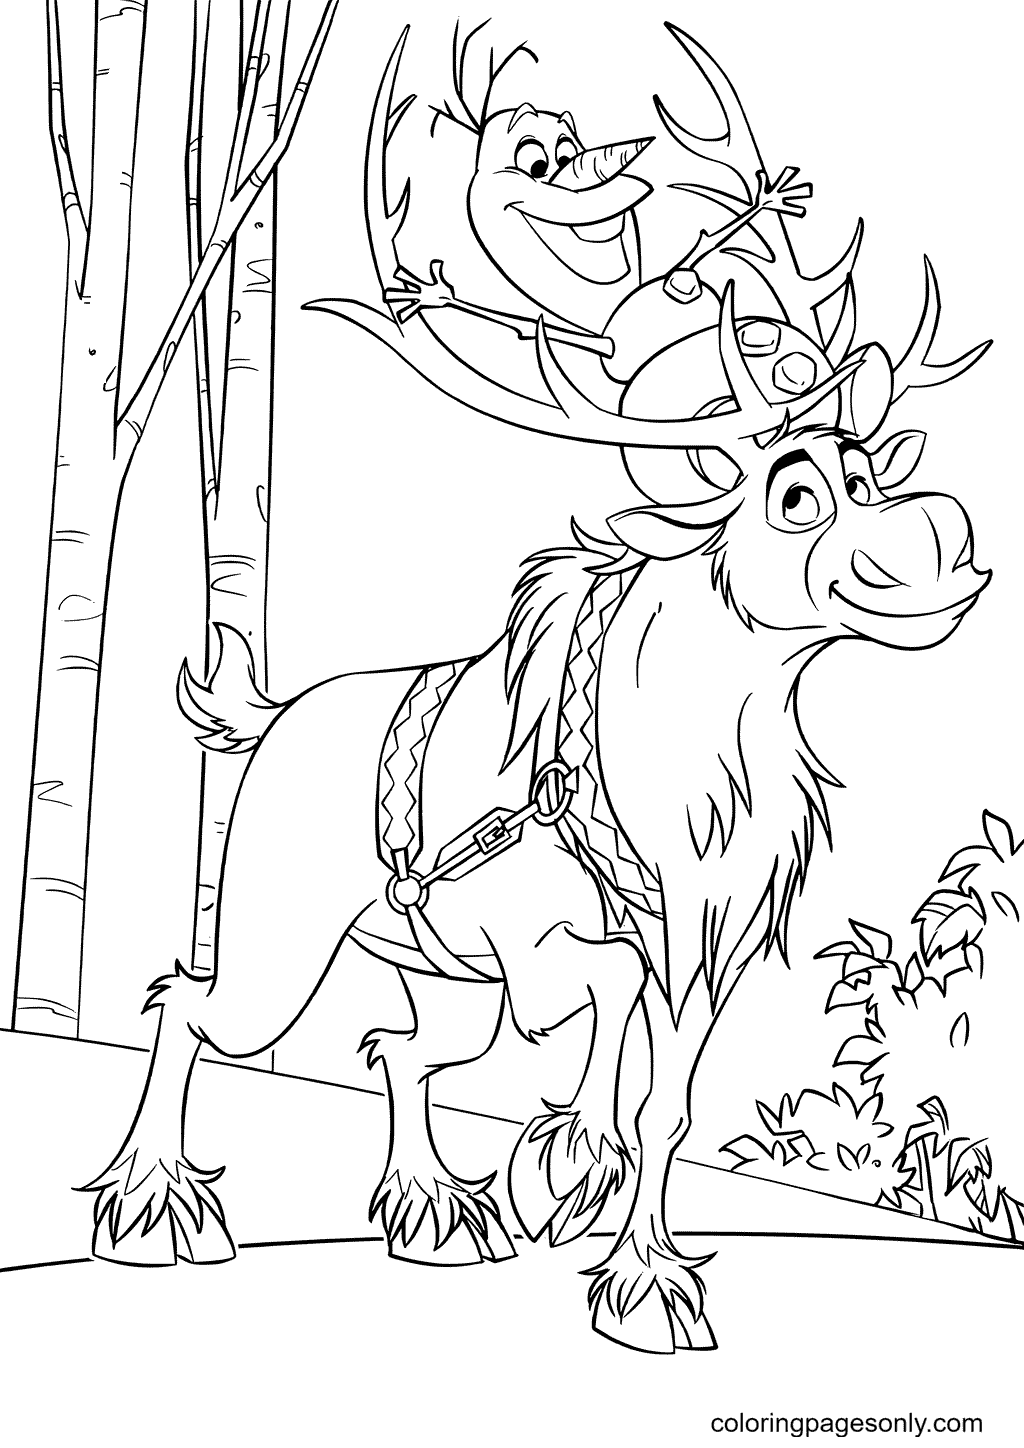 Snowman Olaf and Sven Reindeer Coloring Pages